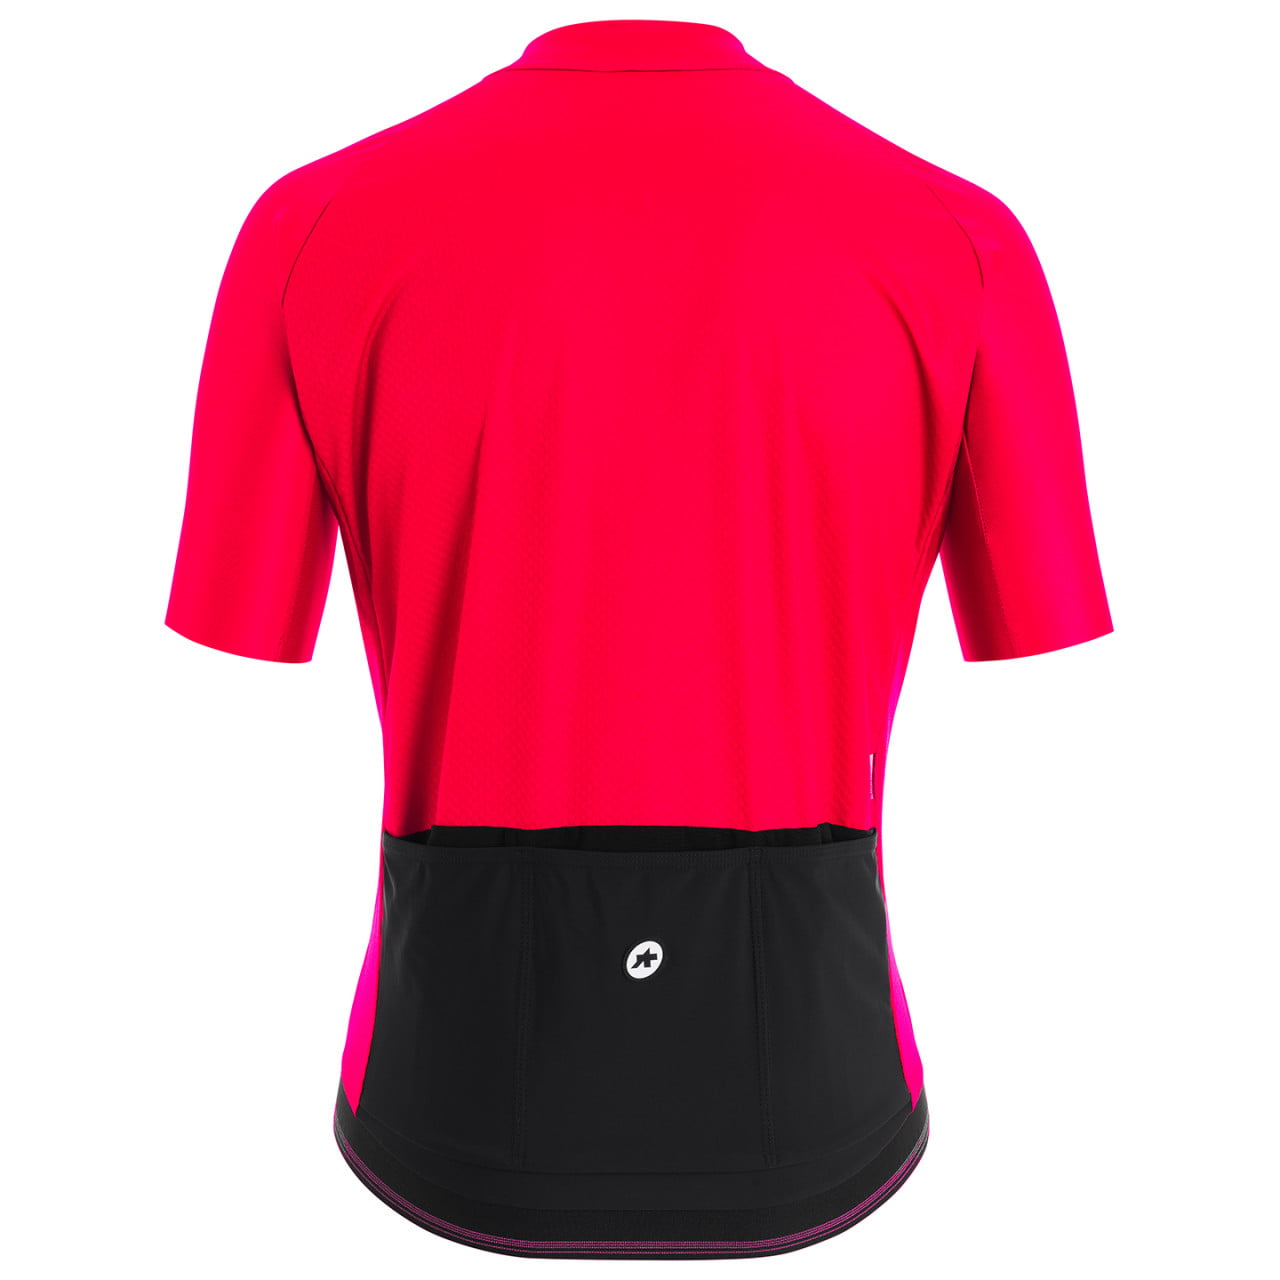 Maillot manches courtes Mille GT C2 EVO